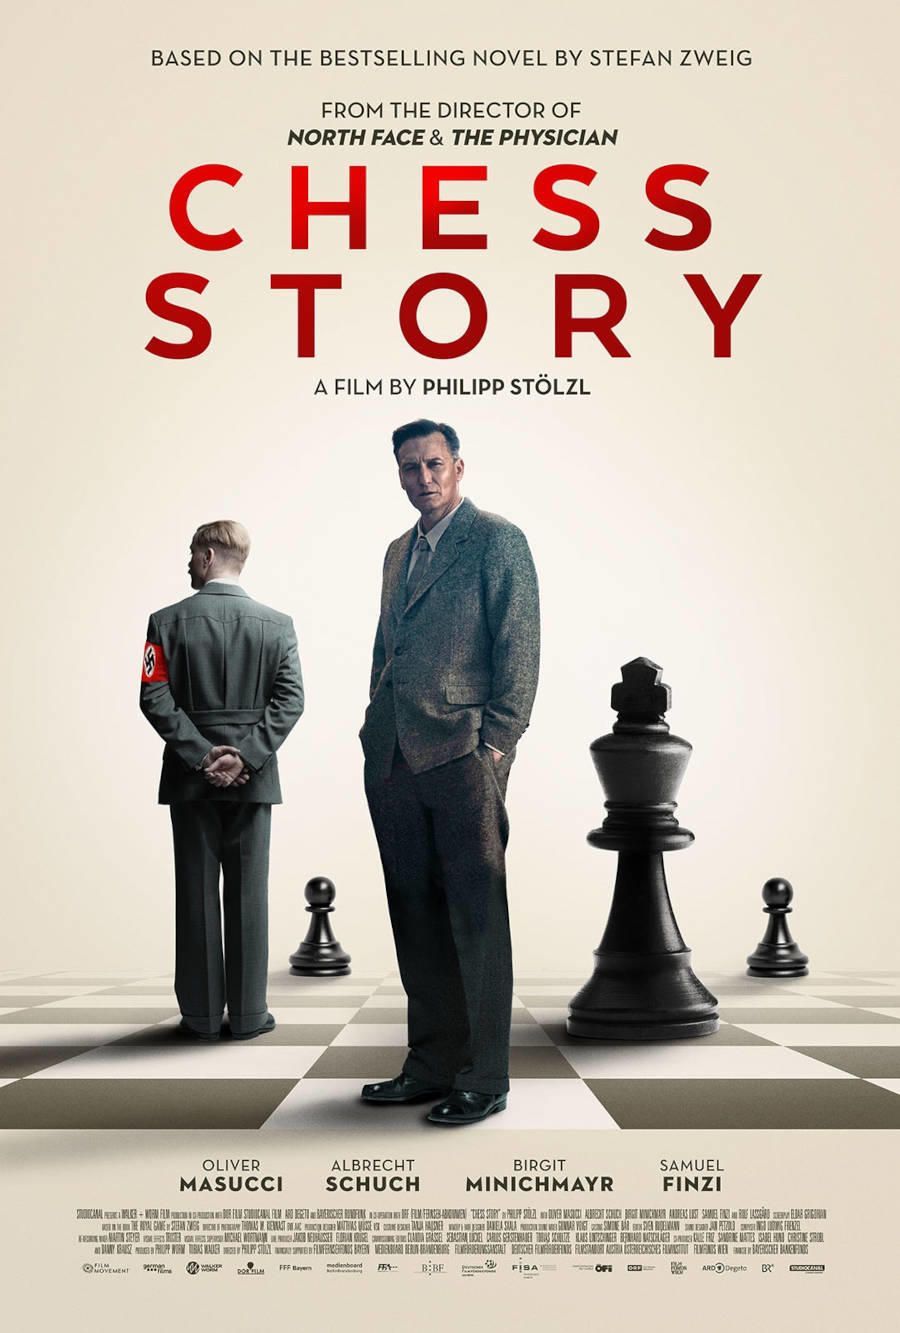 The Pawn’s Gambit: On Adapting Stefan Zweig’s “Chess Story”